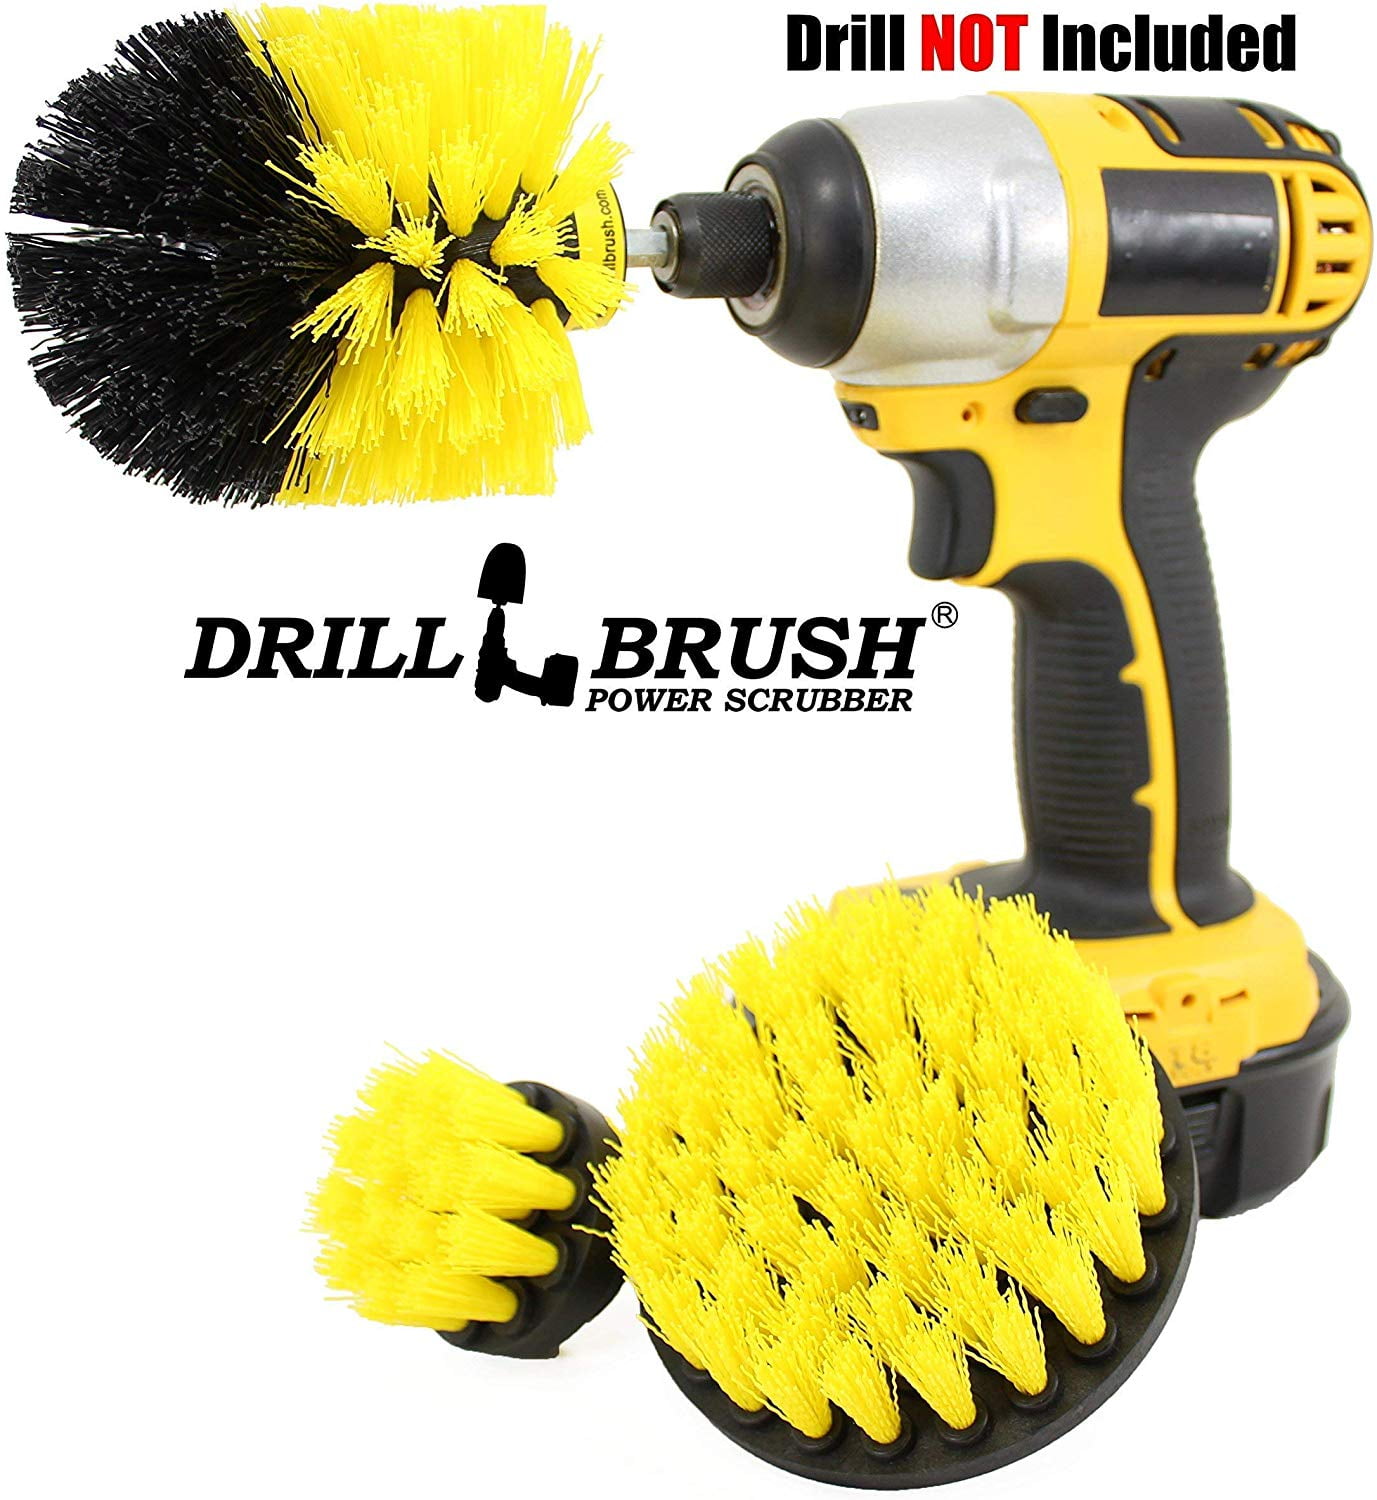 3 Pcs Drill Brush Set Power Scrubber Drill Attachment Carpet Cleaning Tile Grout 